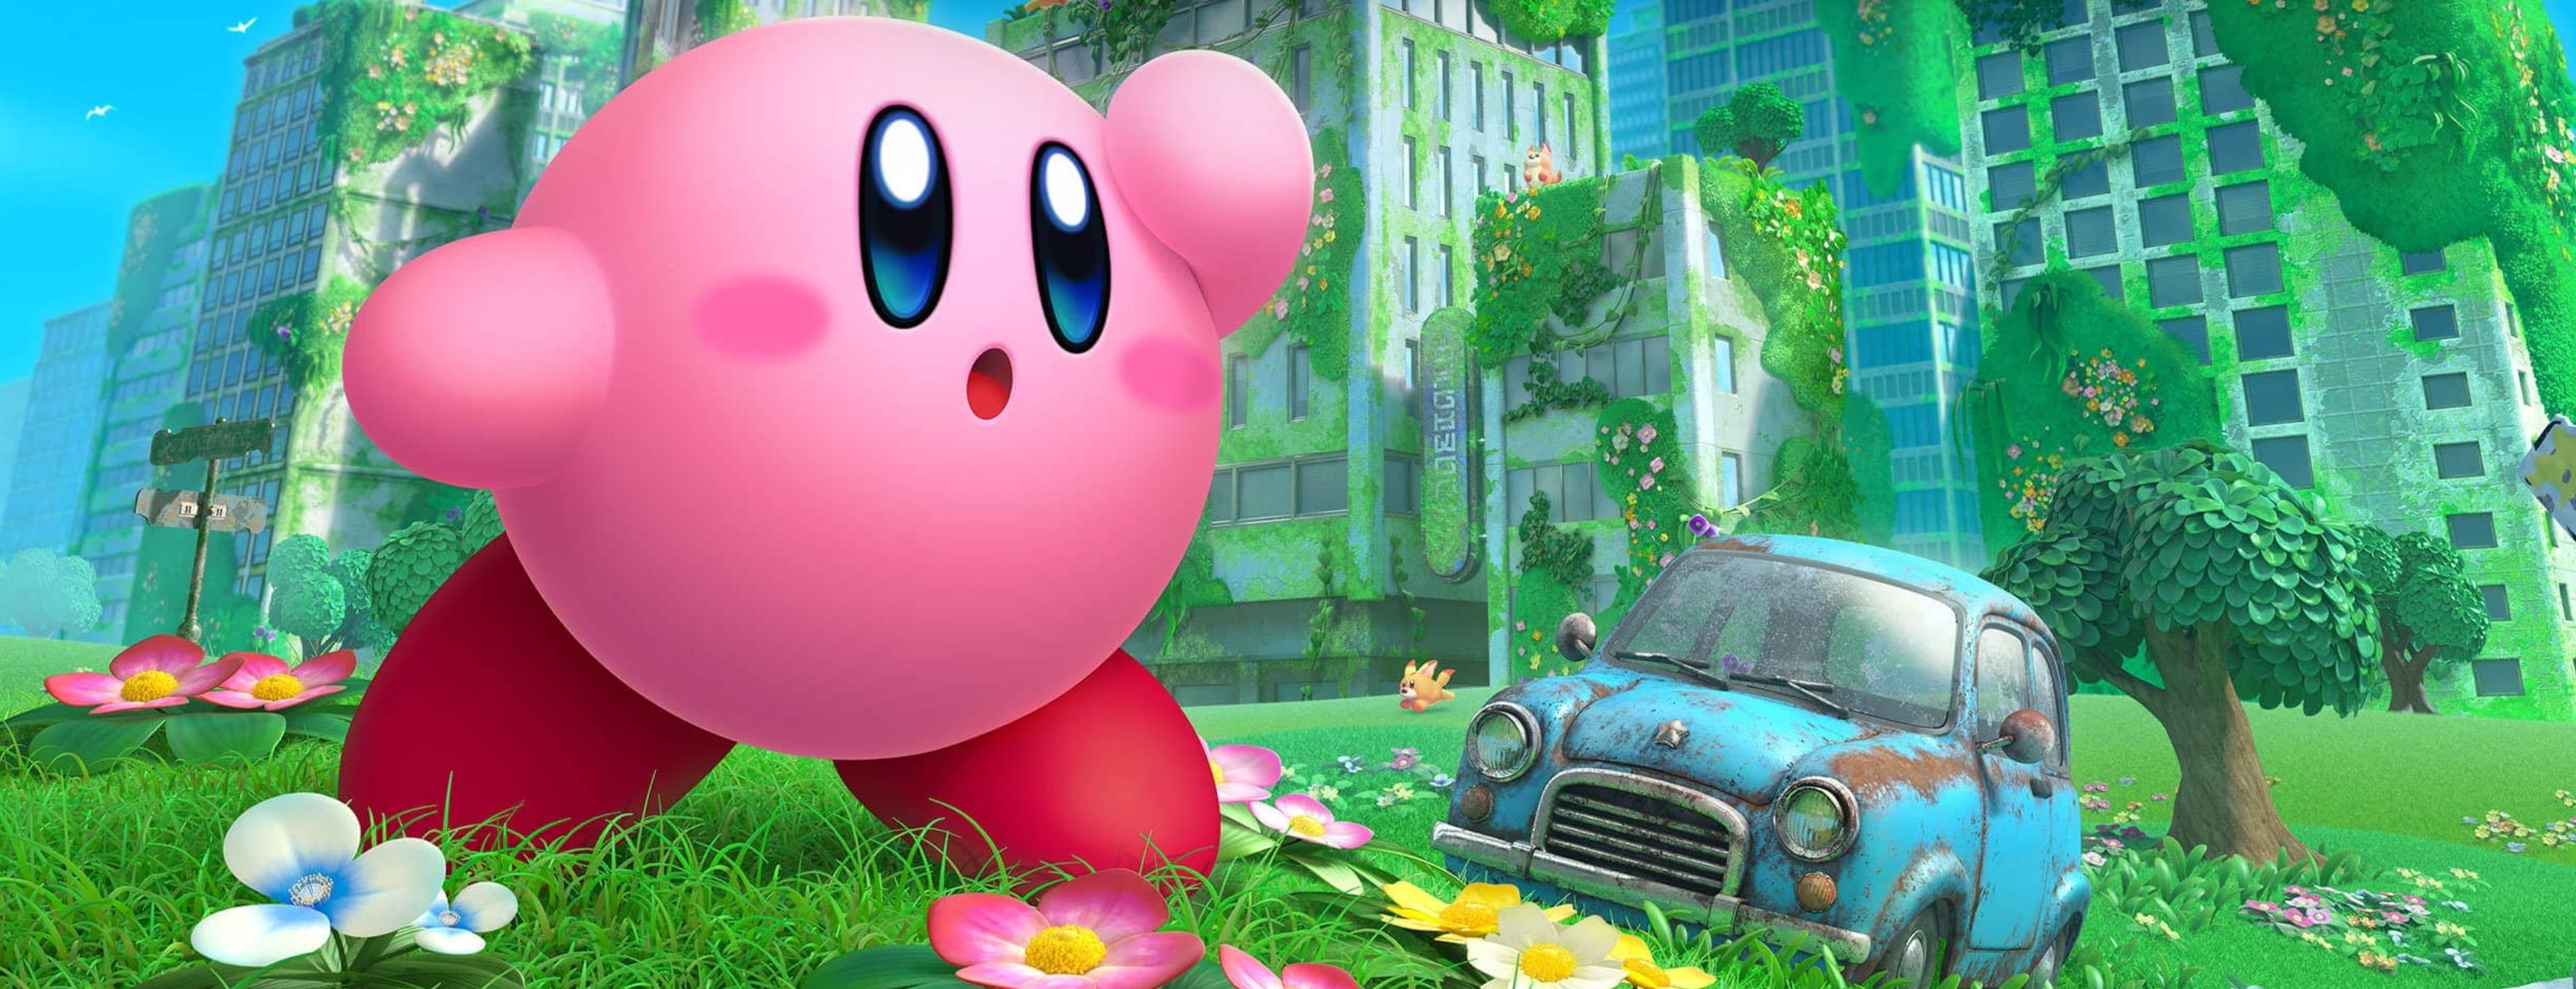 kirby_and_the_forgotten_land.jpg